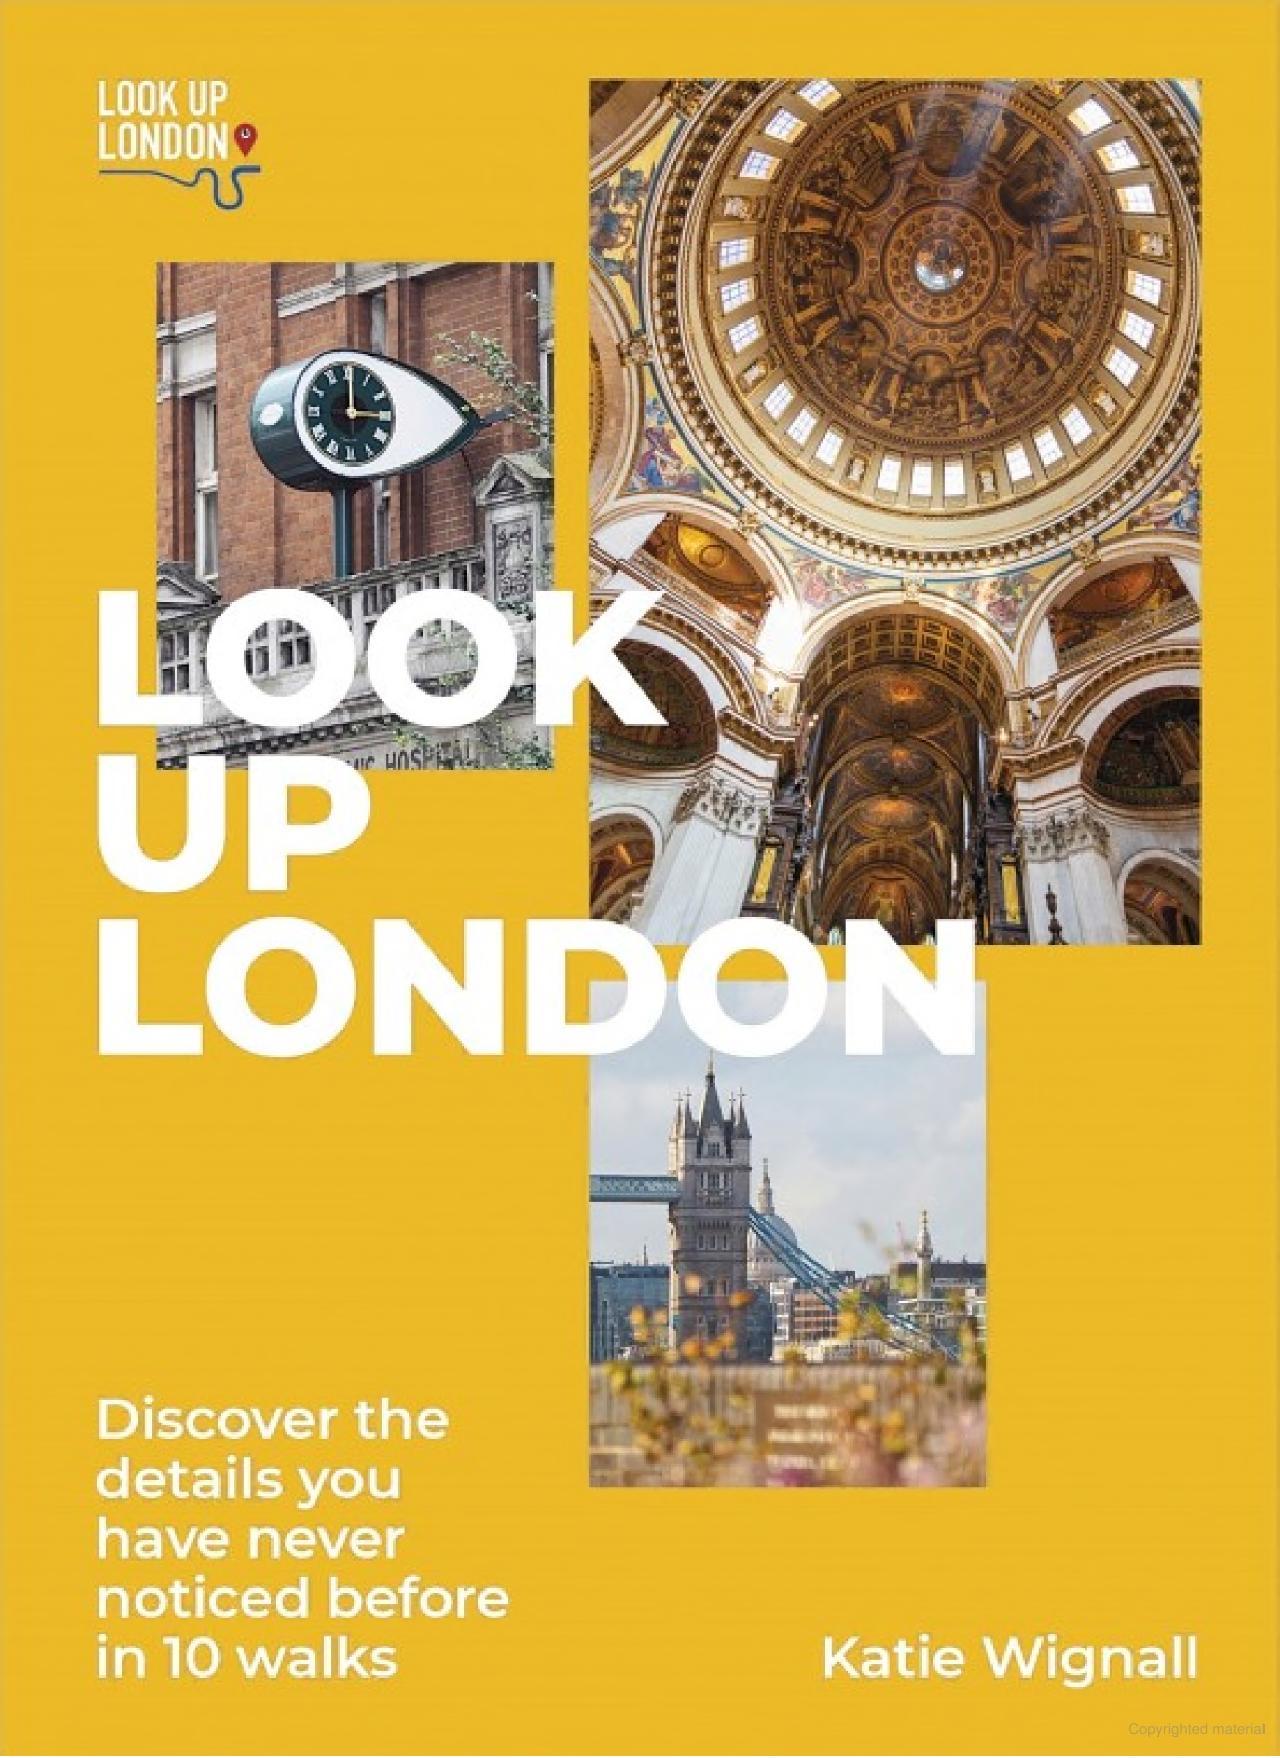 Look Up London by Katie Wignall.